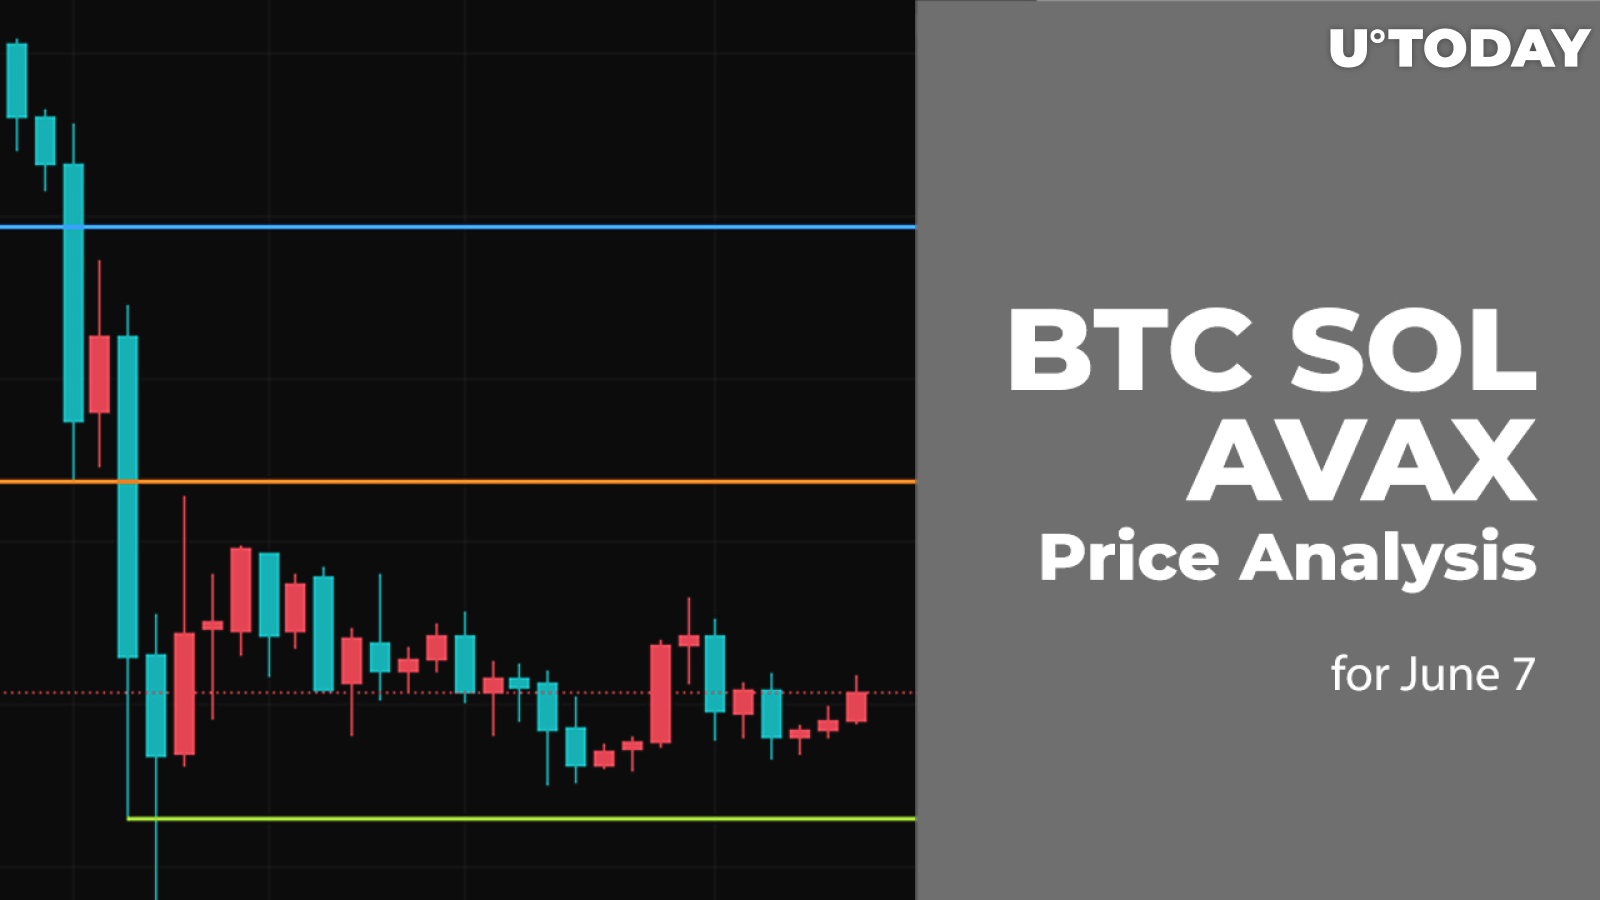 BTC, SOL and AVAX Price Analysis for June 7